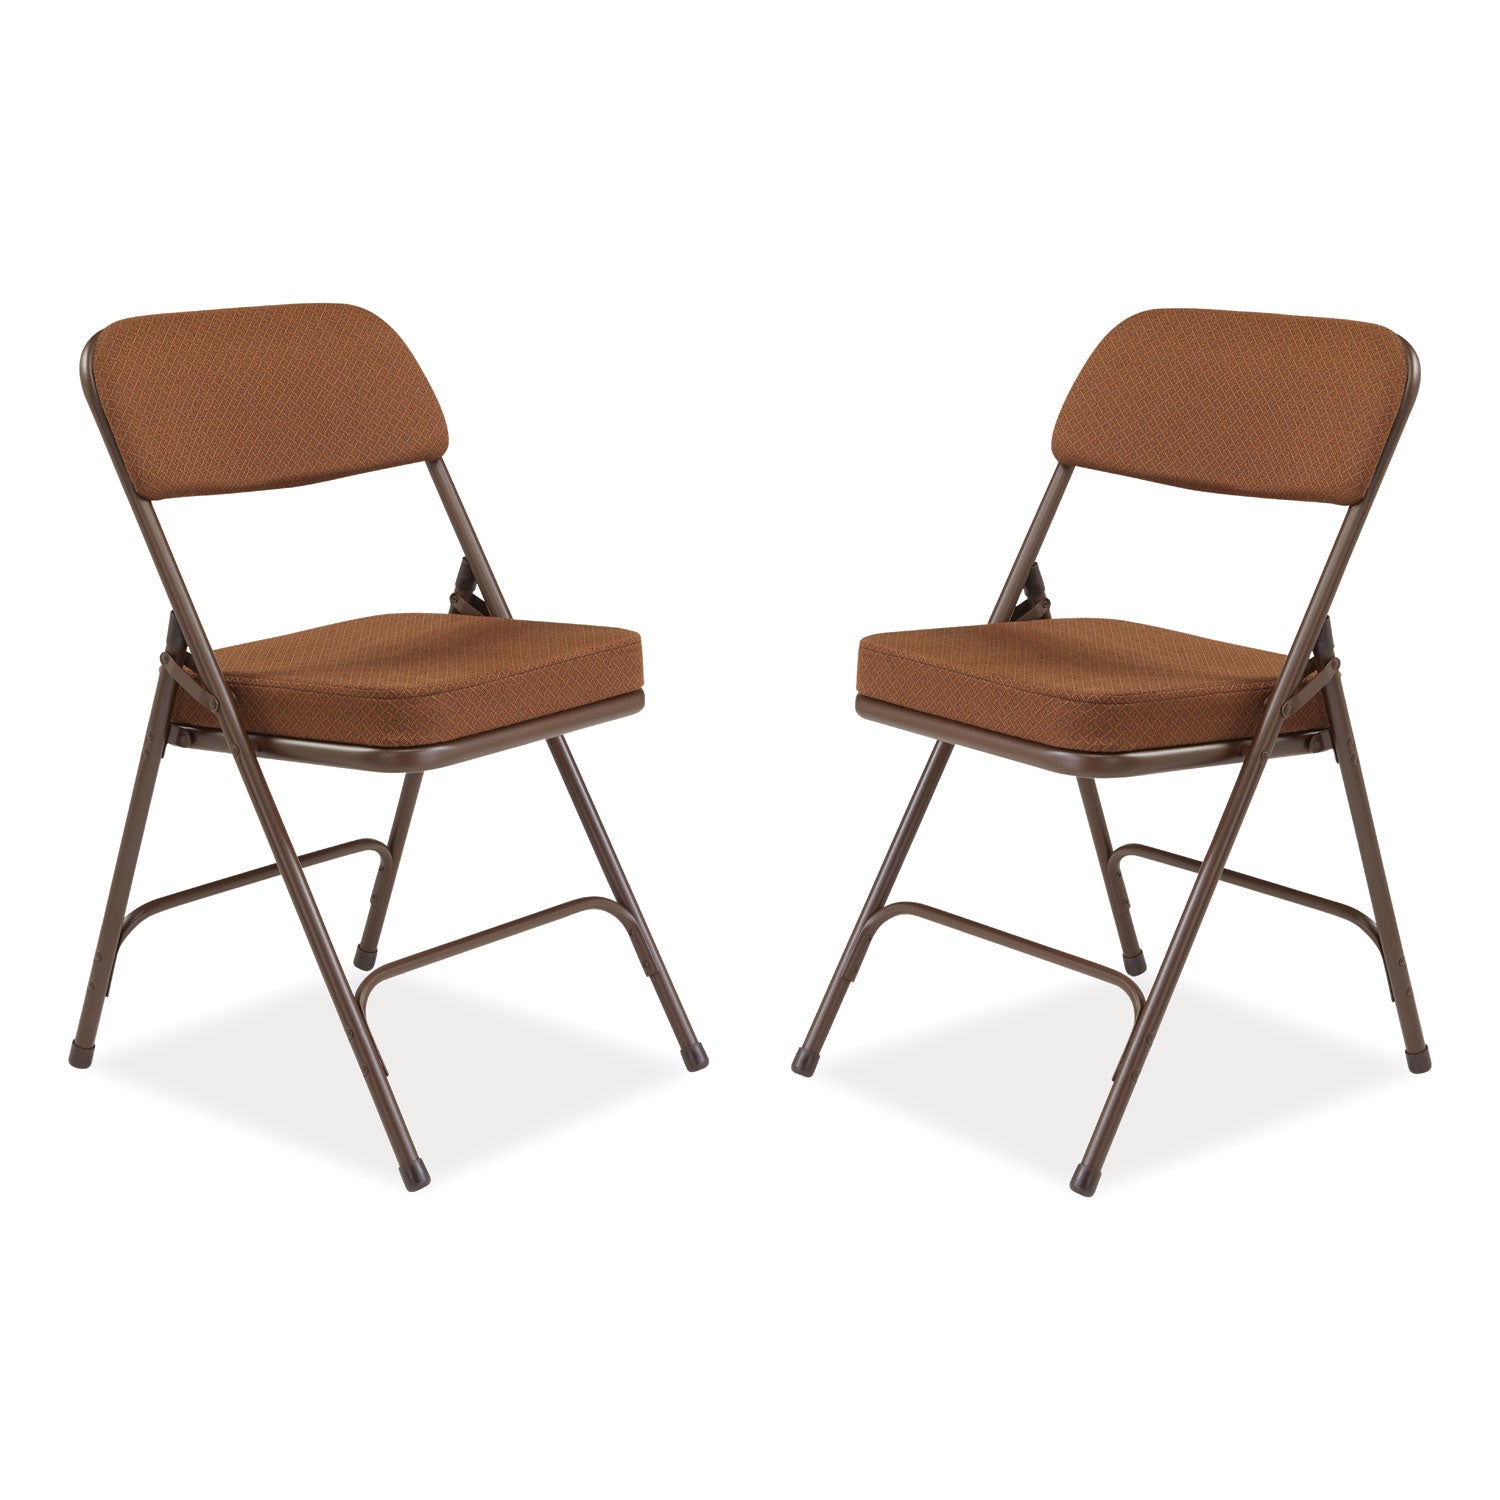 3200-series-premium-fabric-dual-hinge-folding-chair-supports-300-lb-gold-seat-back-brown-base-2-ct-ships-in-1-3-bus-days_nps3219 - 1